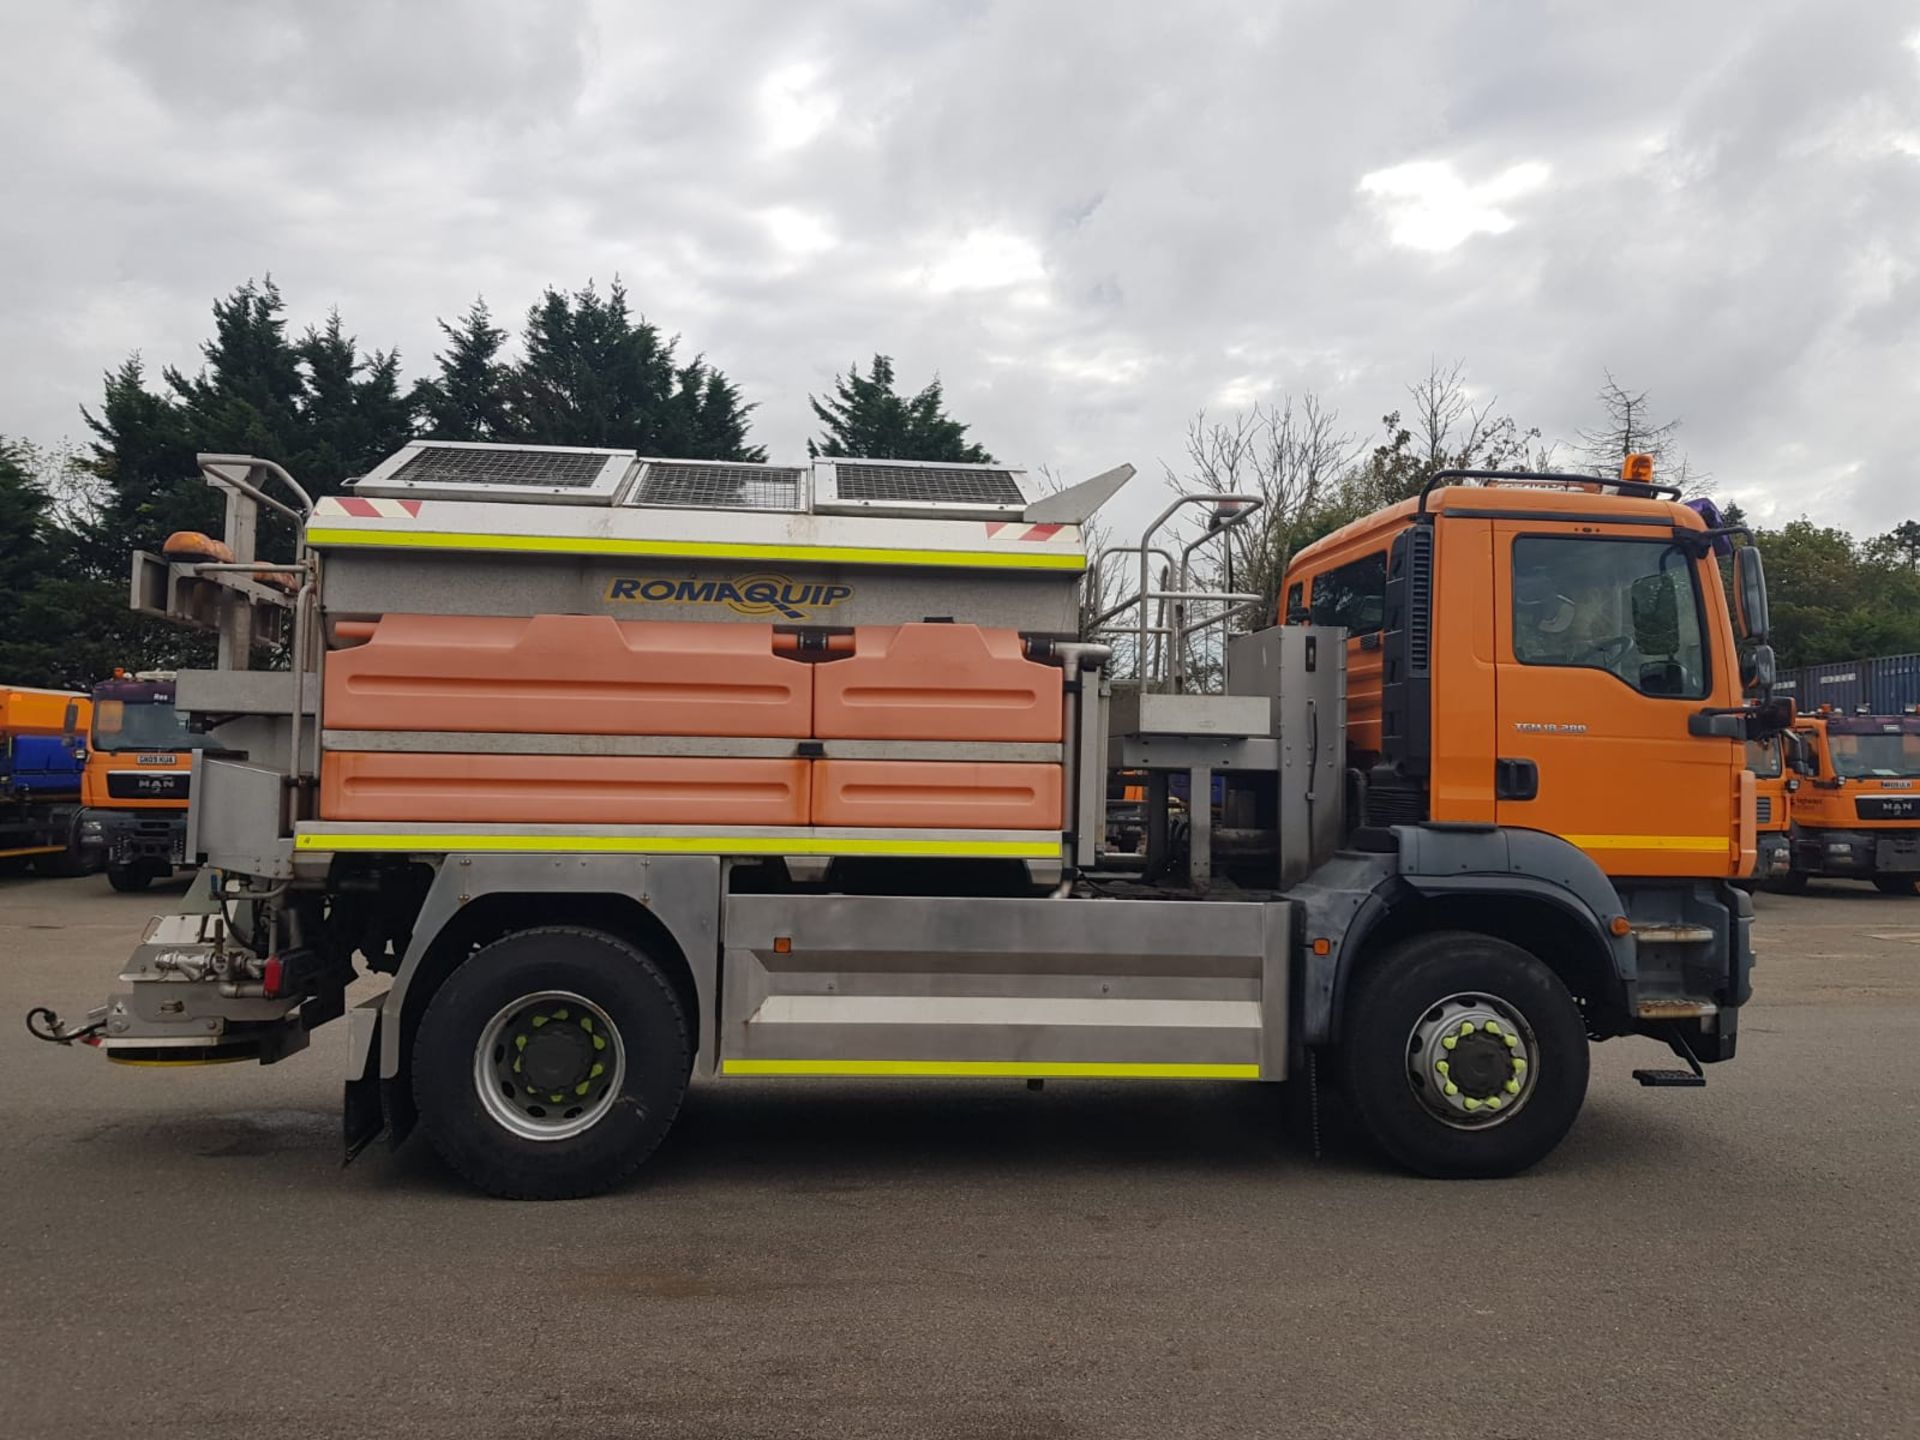 MAN 2009 (reg GN09 OUK) TGM 18.280 4x4 with ROMAQUIP pre-wet gritter mount. - Image 7 of 23